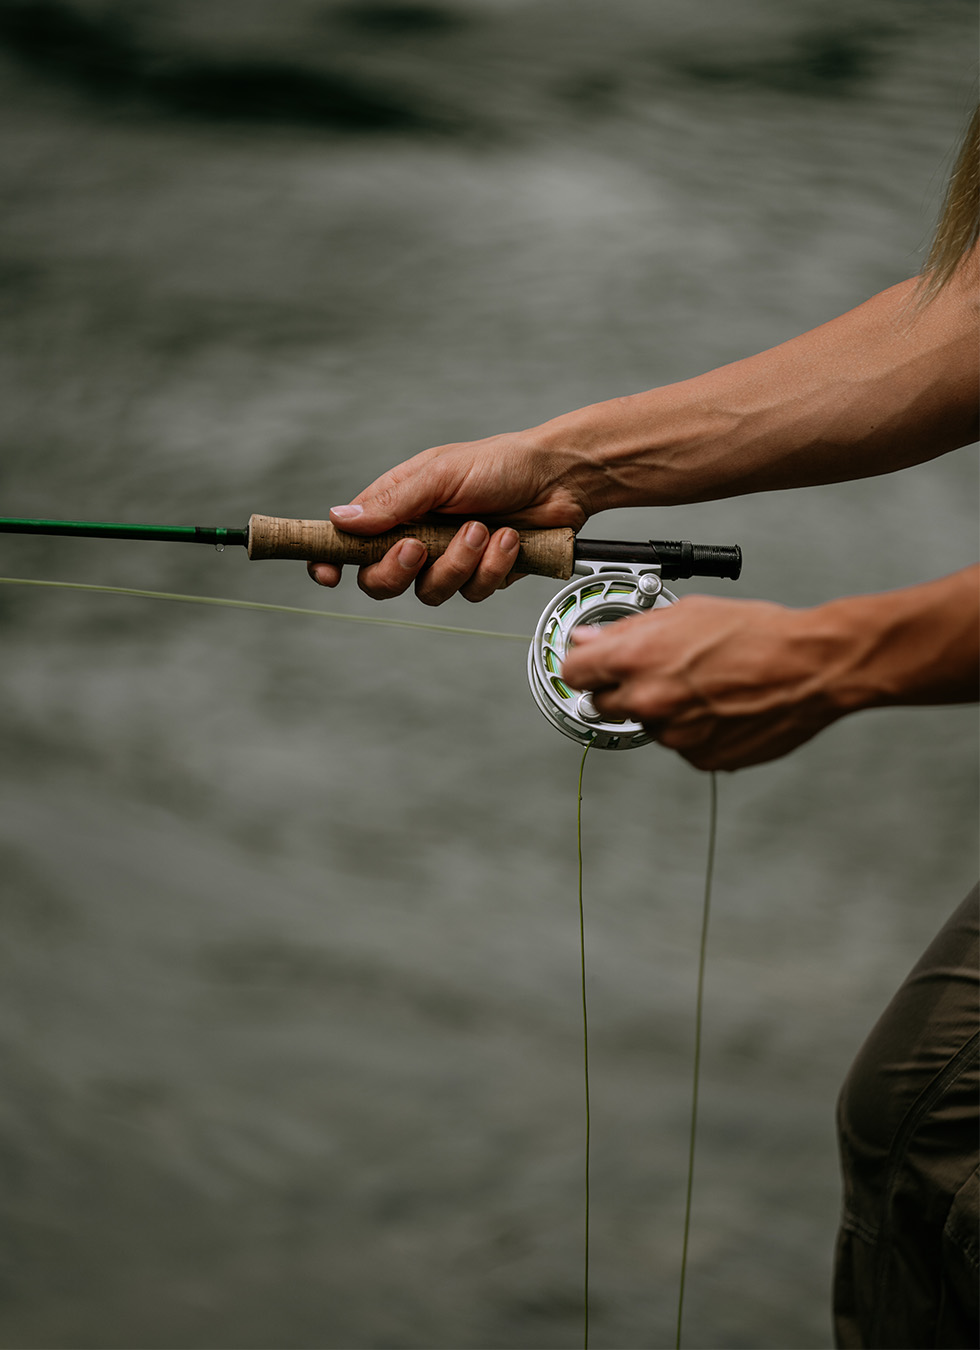 Fly Fishing Tips: How to Stay Dry & Comfortable on Rainy Days